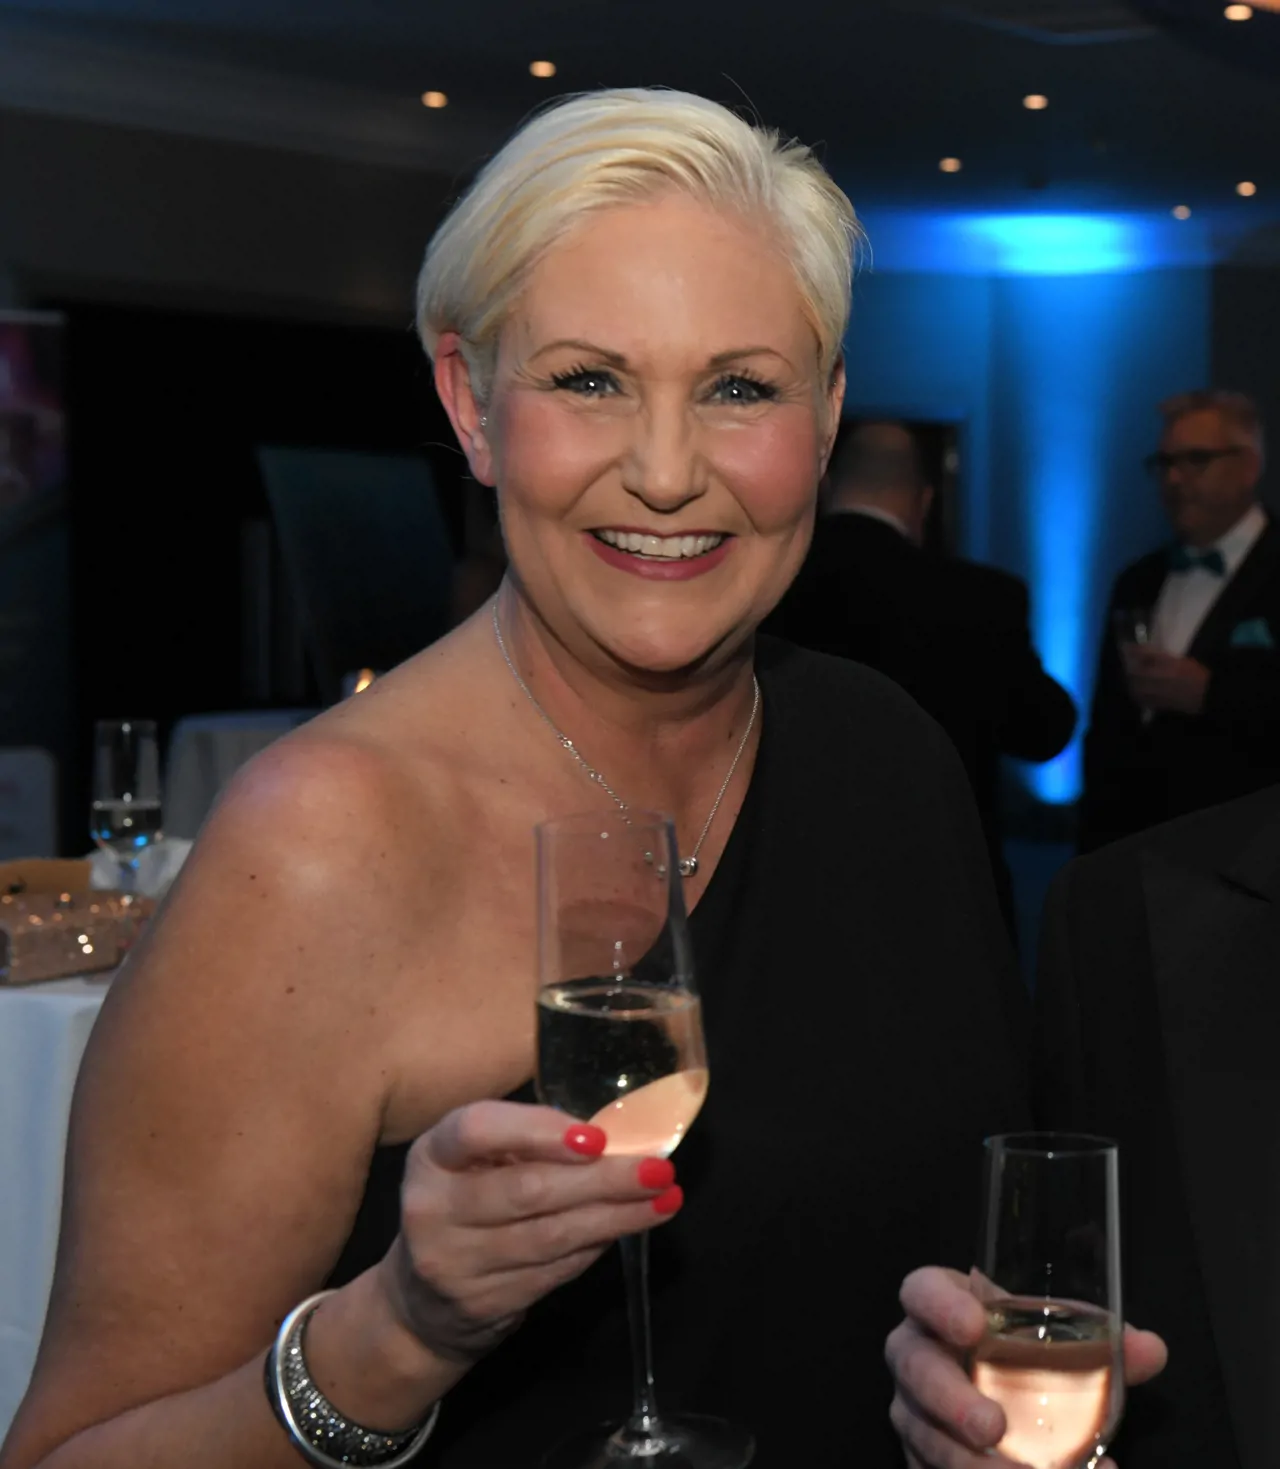 Portrait of Jayne smiling at awards ceremony holding a glass of champagne